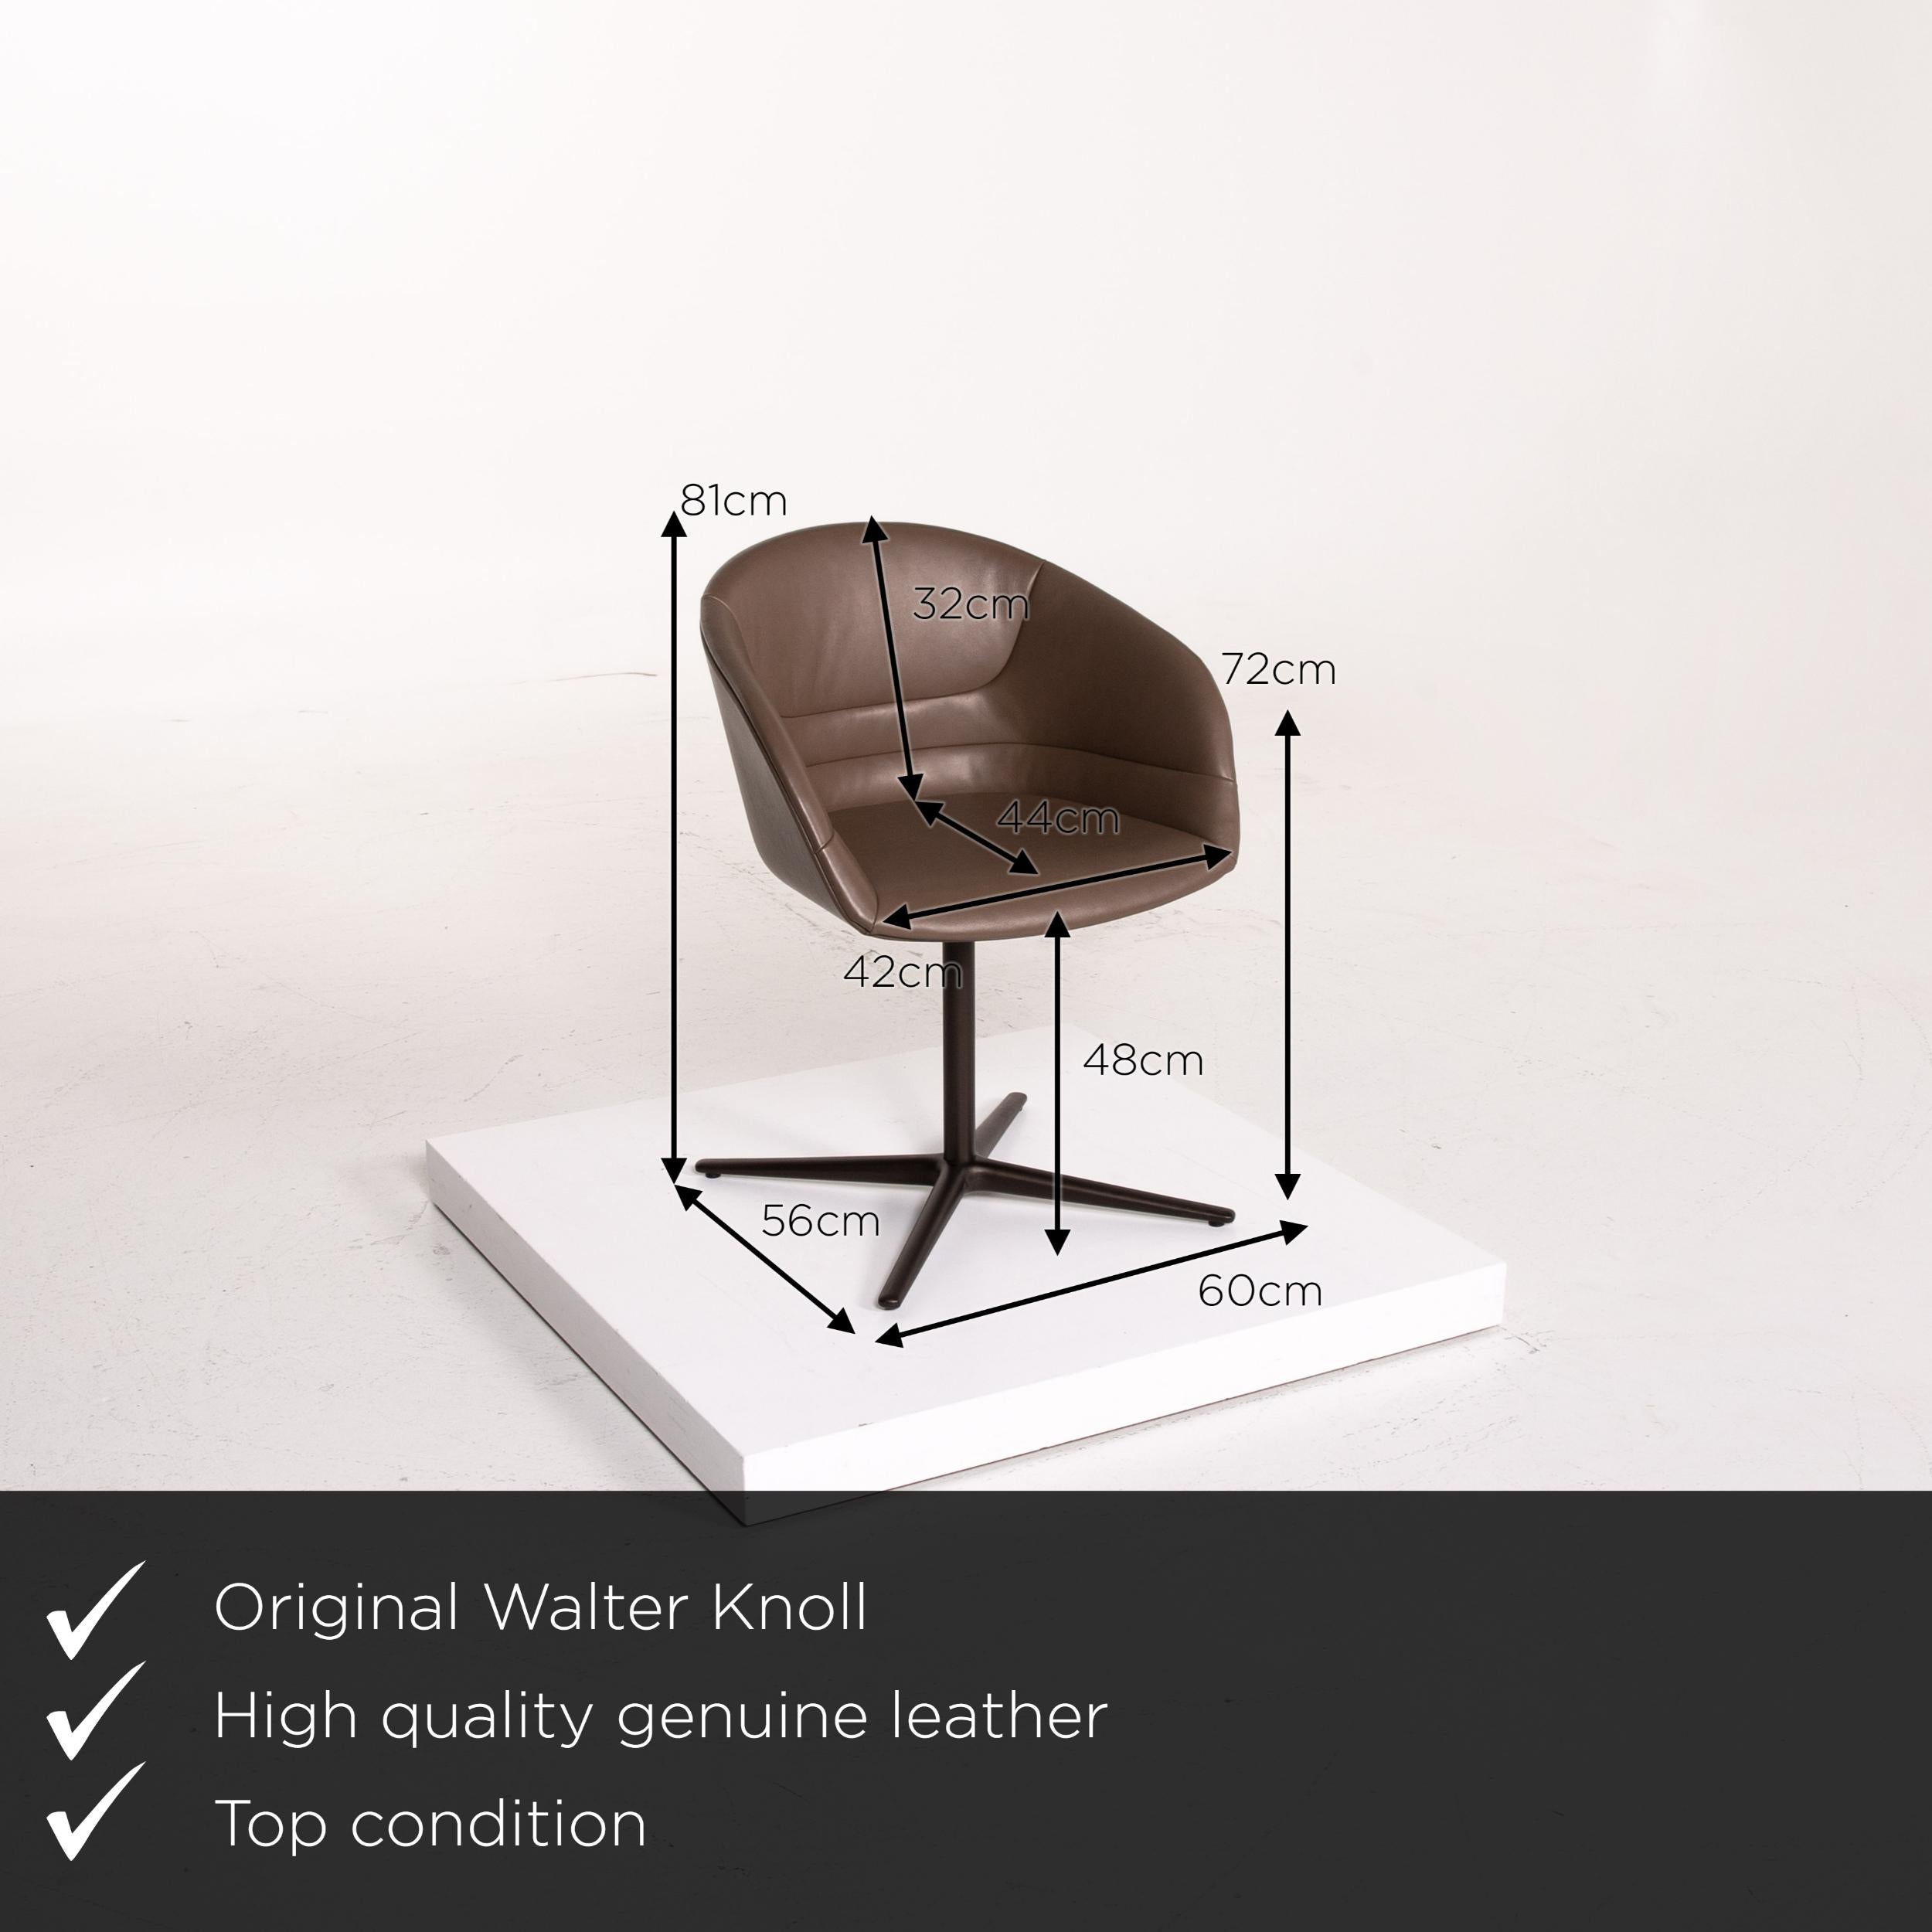 We present to you a Walter Knoll Kyo leather armchair gray chair swivel.

 

 Product measurements in centimeters:
 

Depth 56
Width 60
Height 81
Seat height 48
Rest height 72
Seat depth 44
Seat width 42
Back height 32.